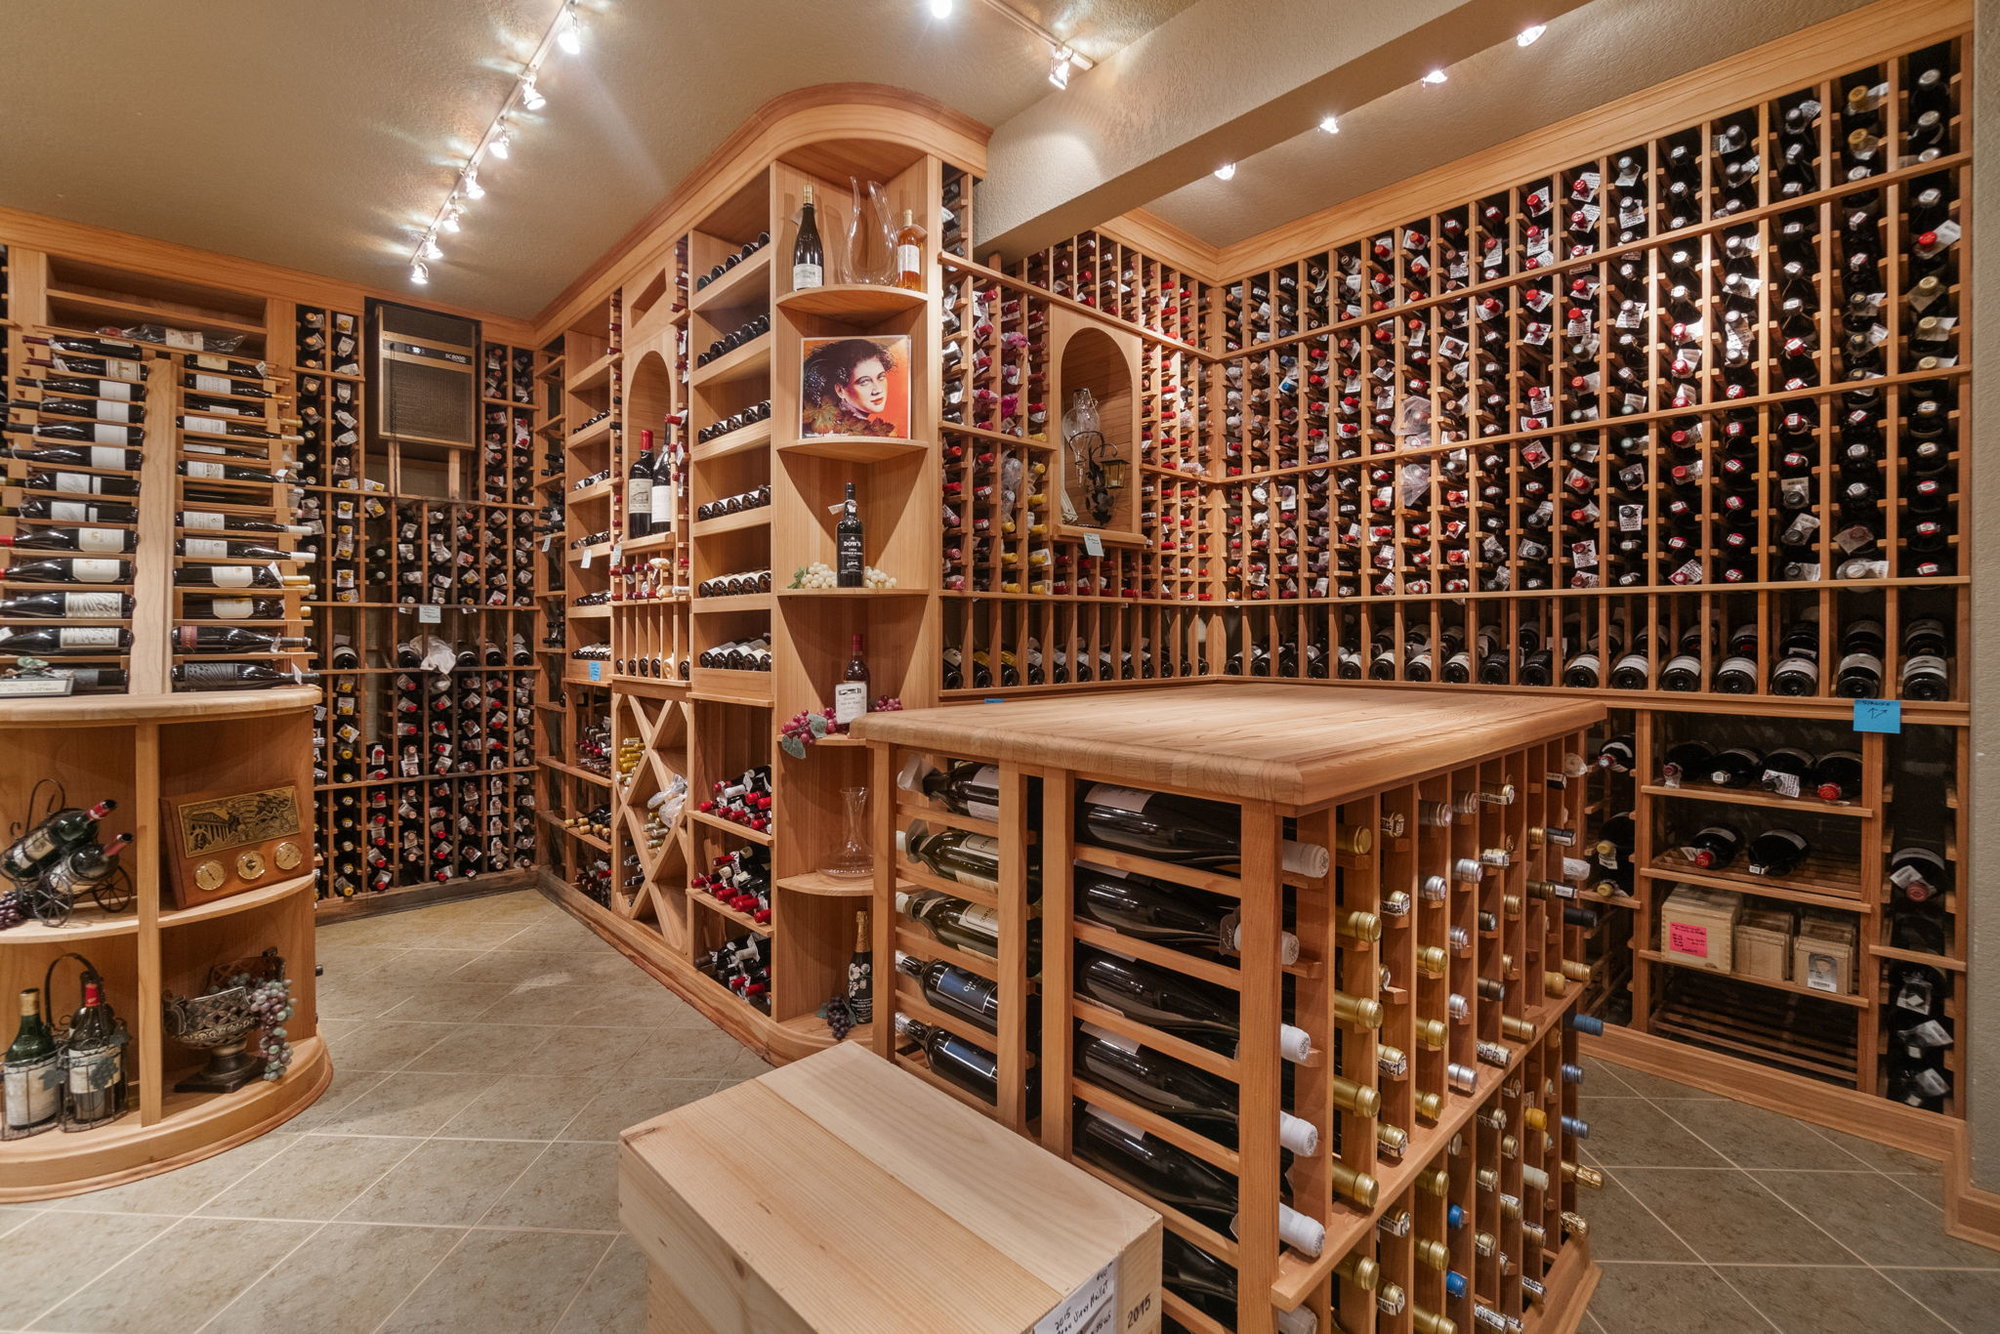 Calling all Wine Enthusiasts. This Custom Built Home has the Wine Cellar of Your Dreams!